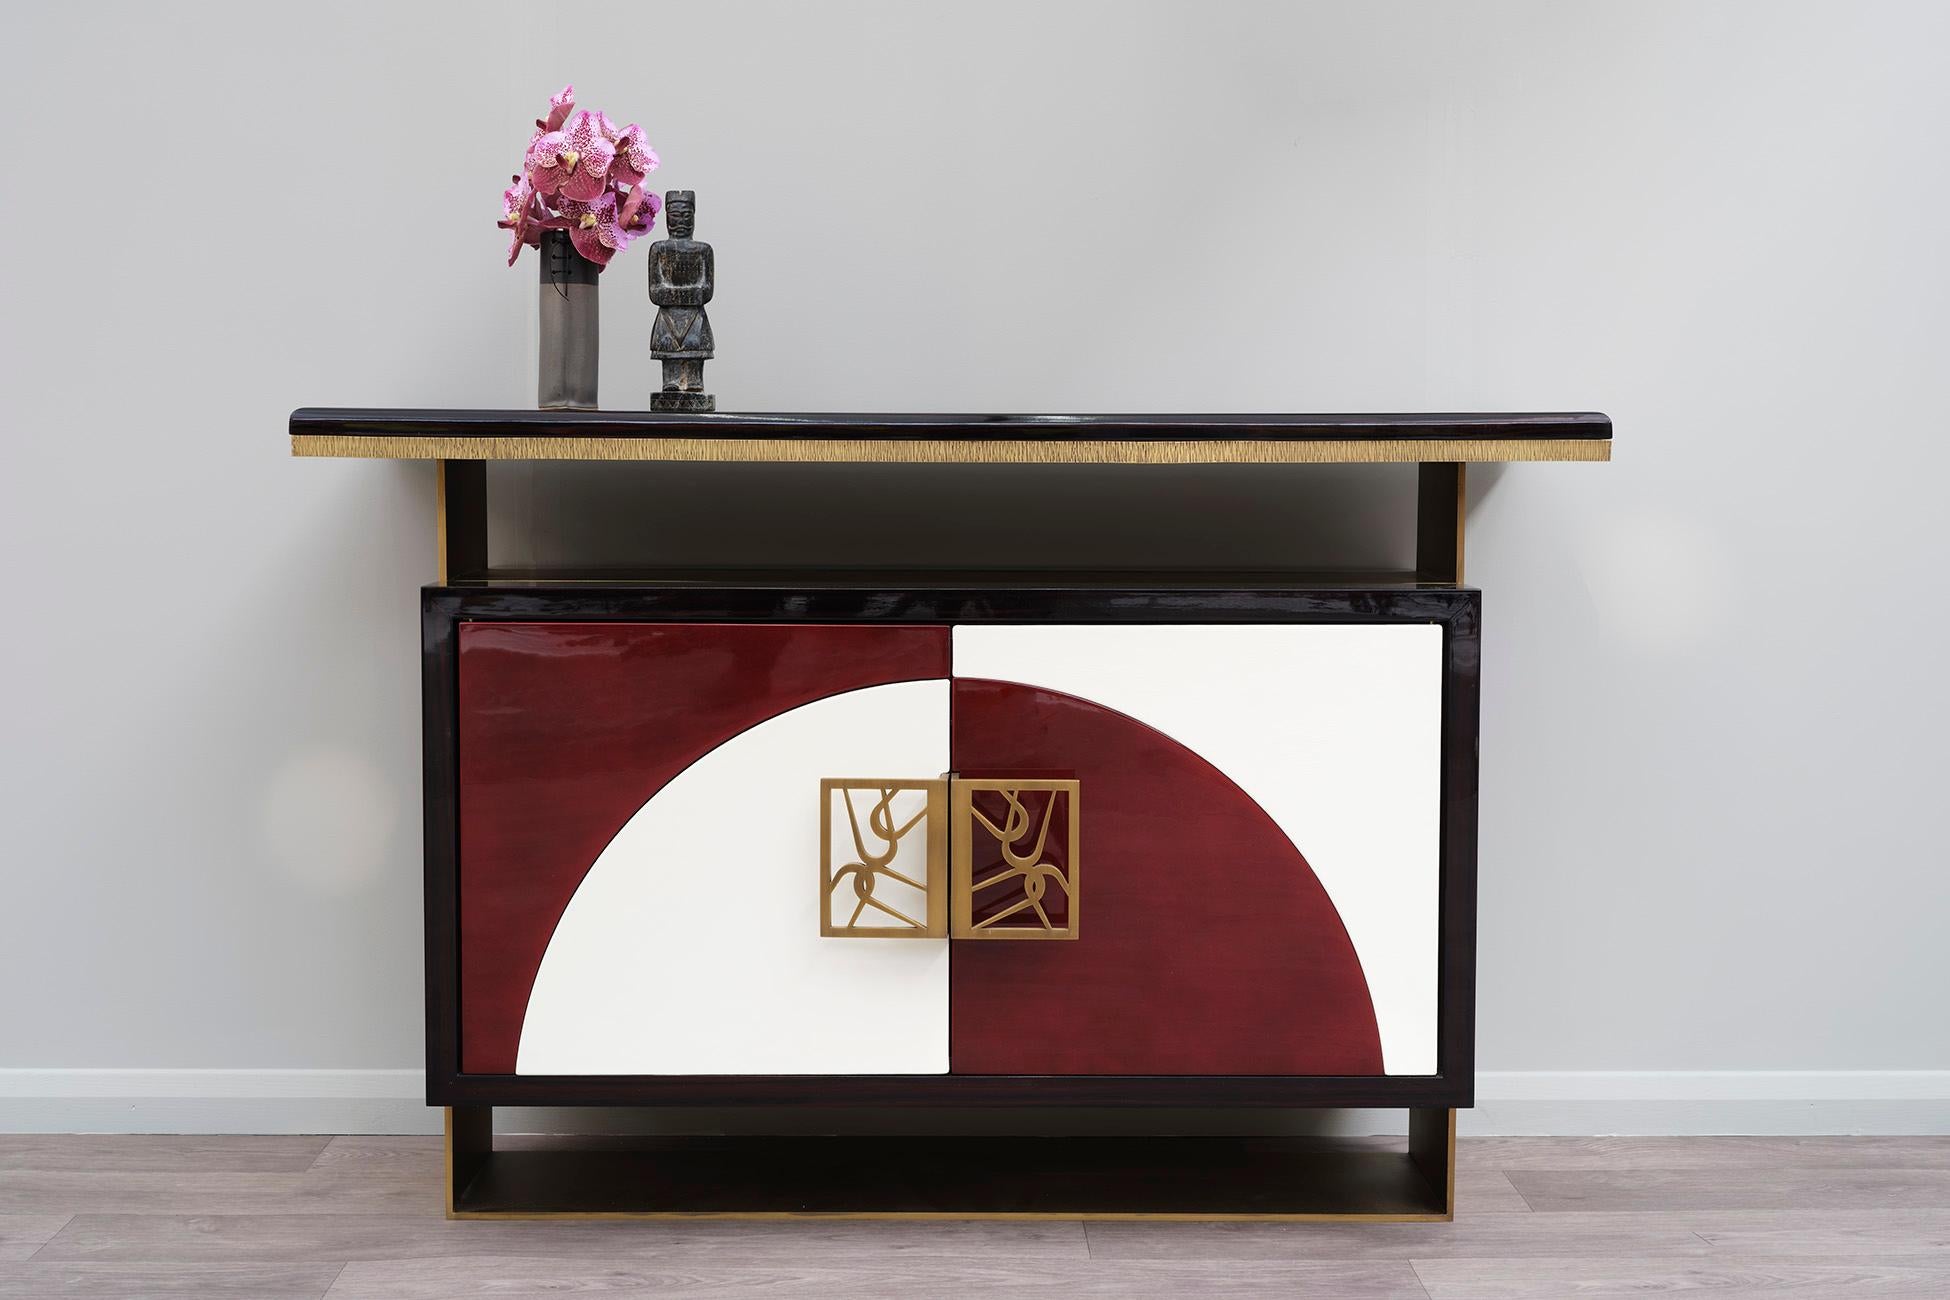 Contemporary Handcrafted Cabinet mixing Asian and Art Deco references, in Lacquer and Brass.

Levitation cabinet is a balancing feature; its support frame is laser cut in solid brass. The case and top are in dark gloss ebony veneer, the interior in